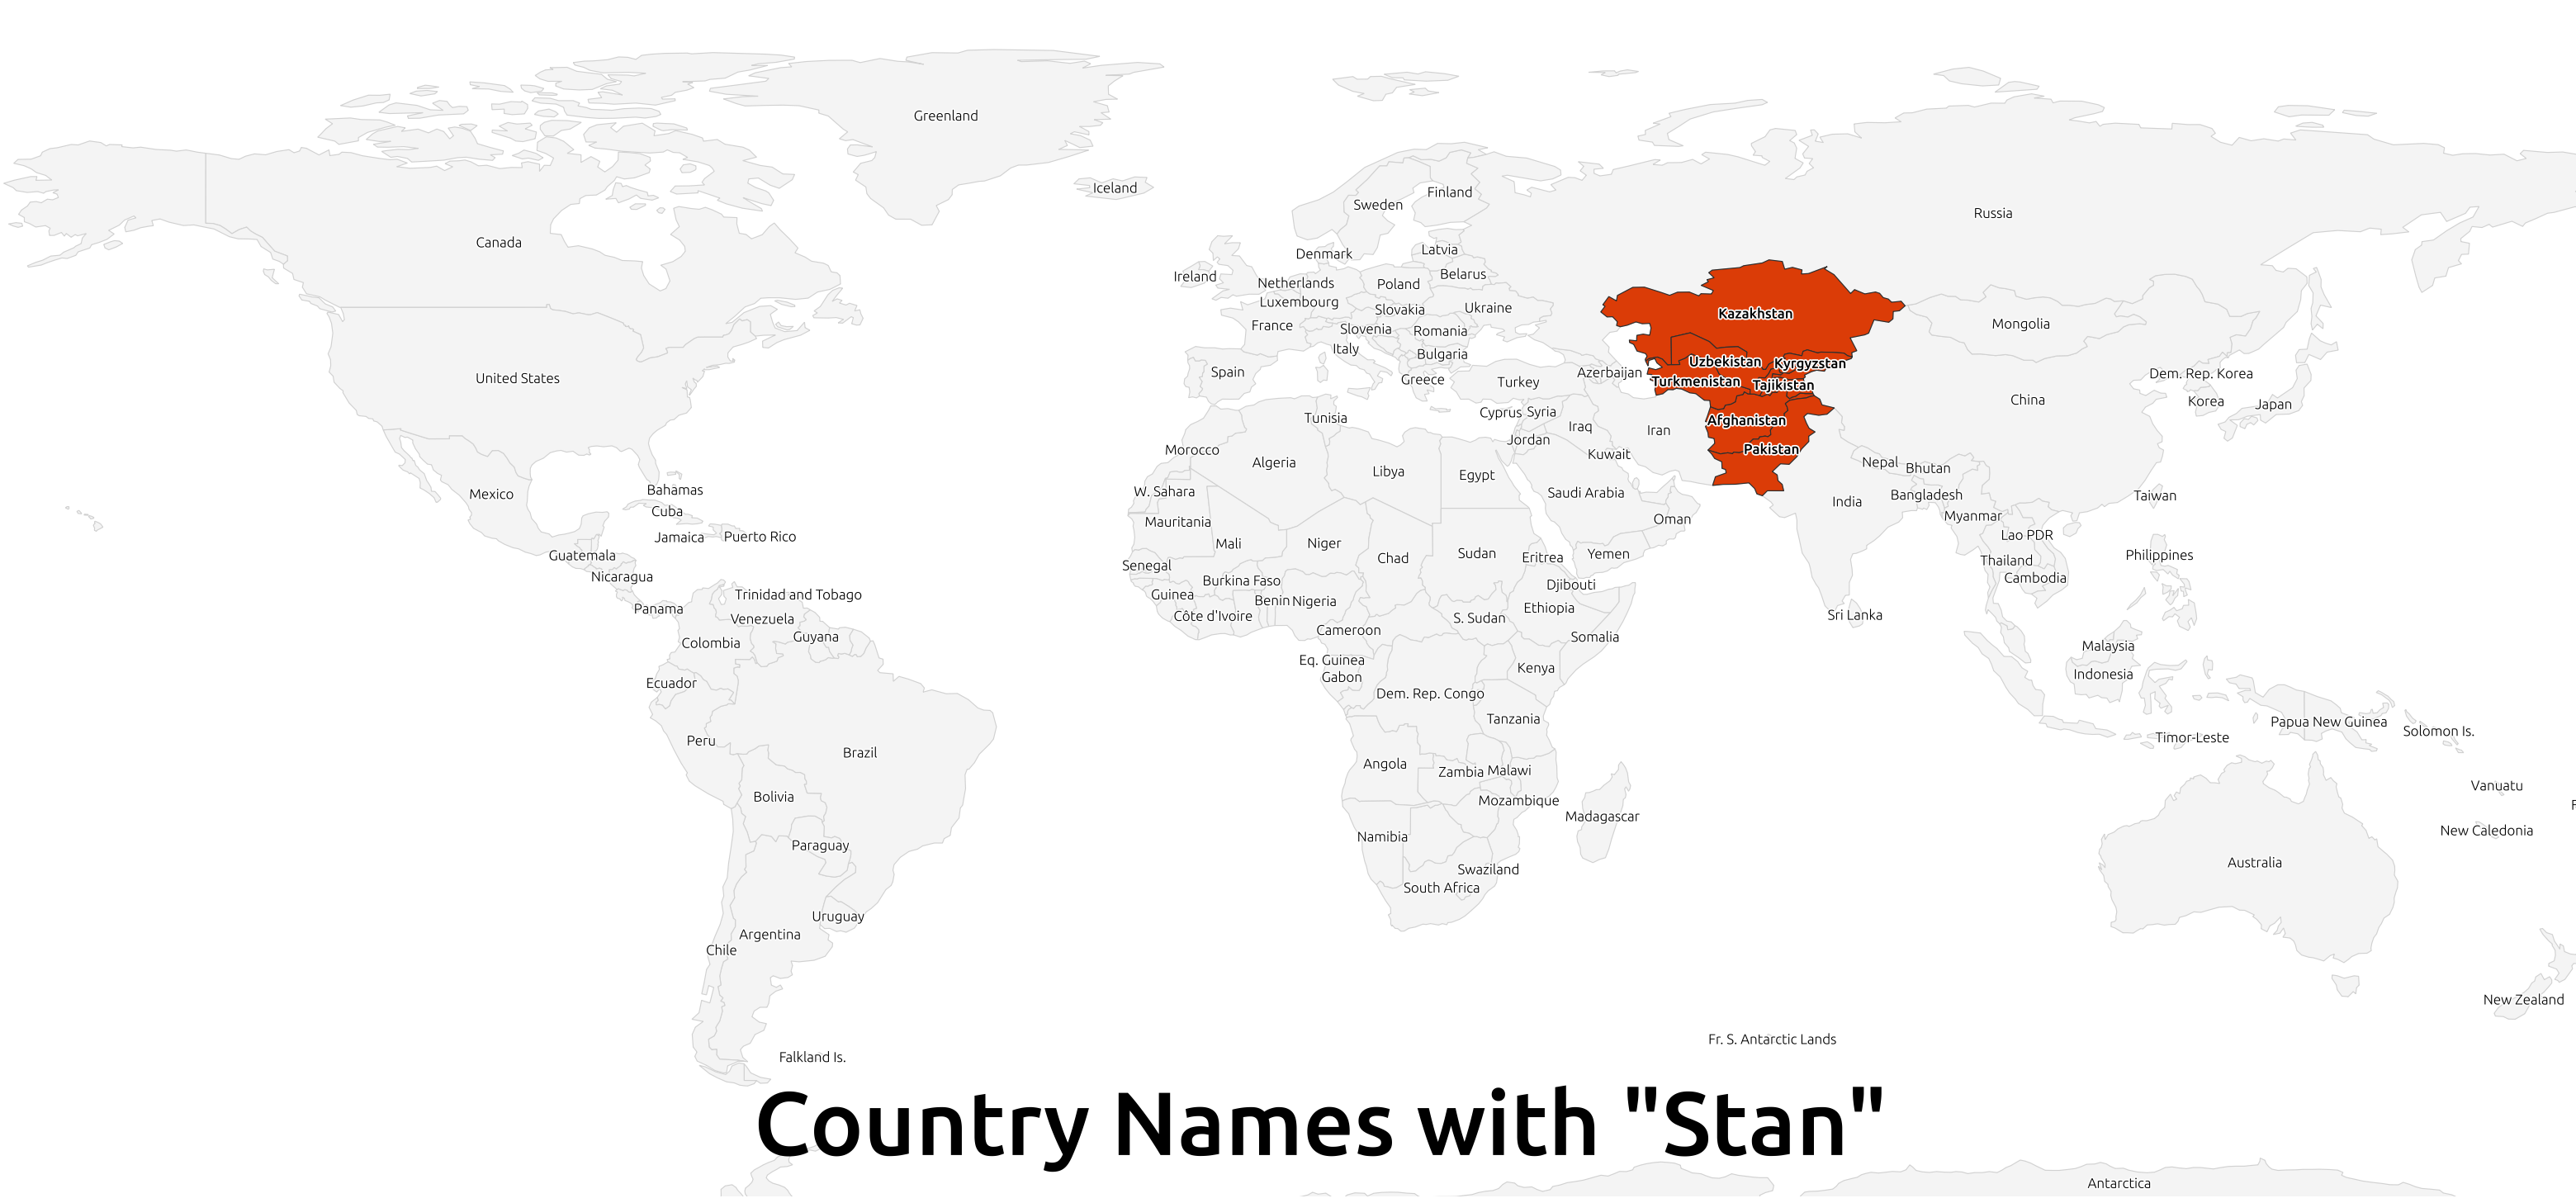 Map_of_Countries_with_Names_Ending_in_%2